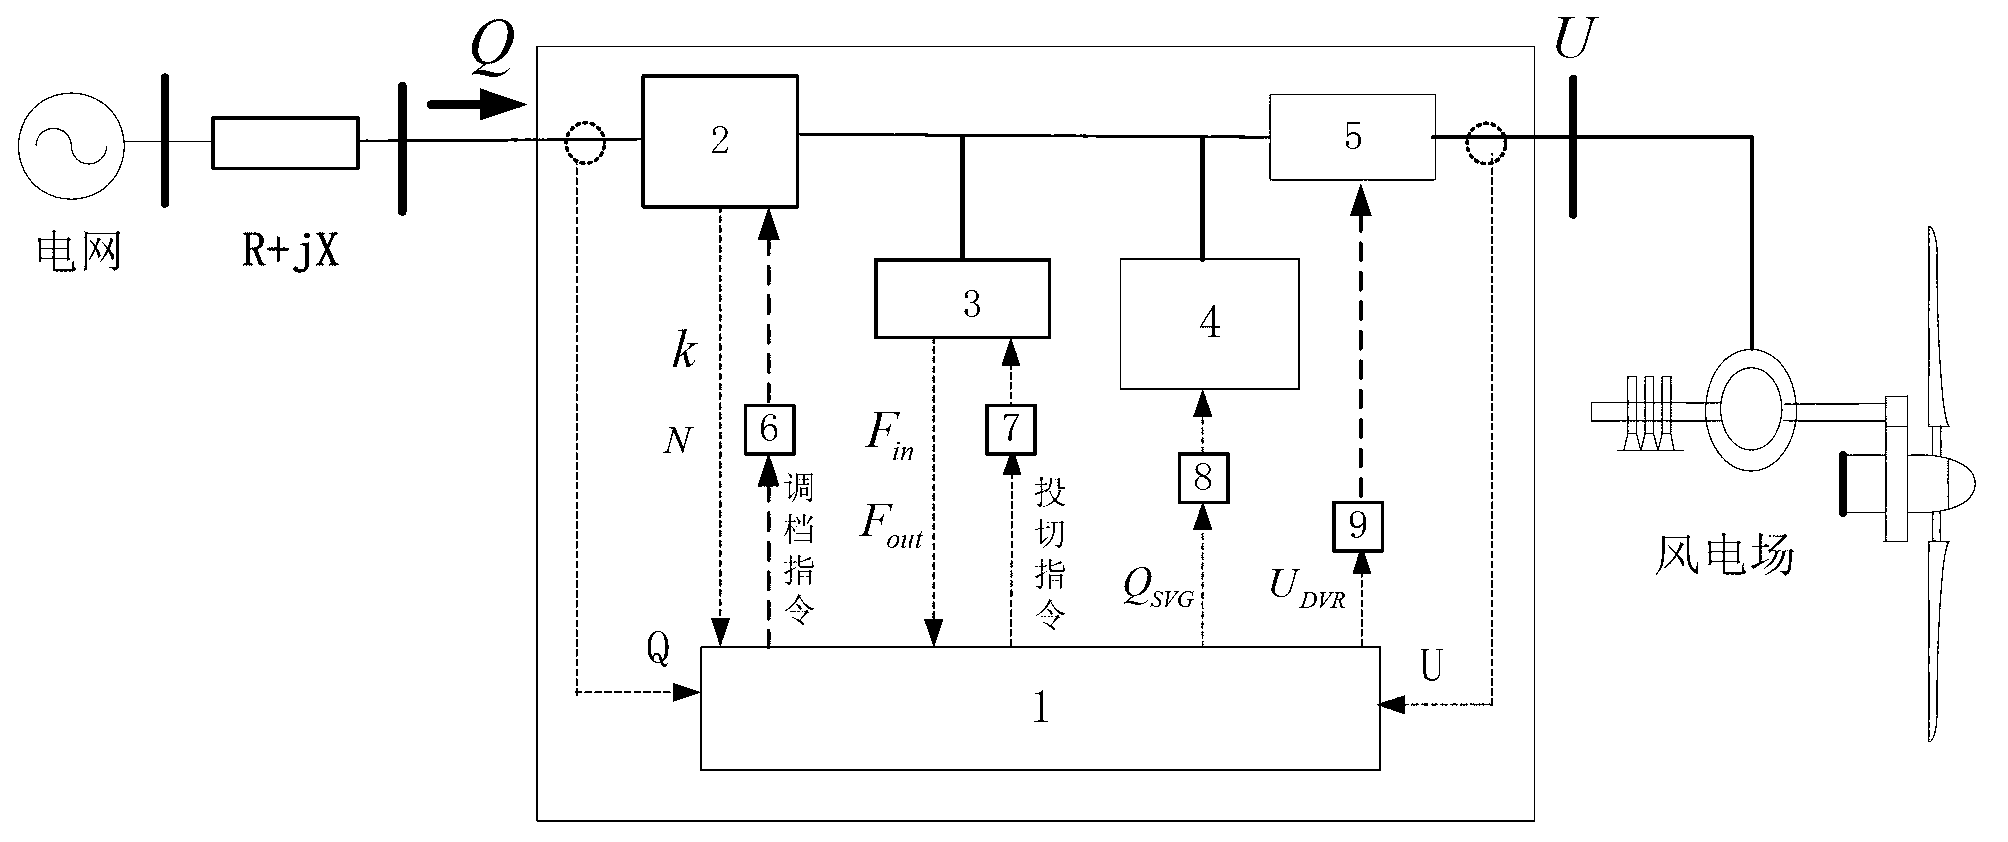 Network voltage reactive-power compound coordination control system and method for new energy power generation